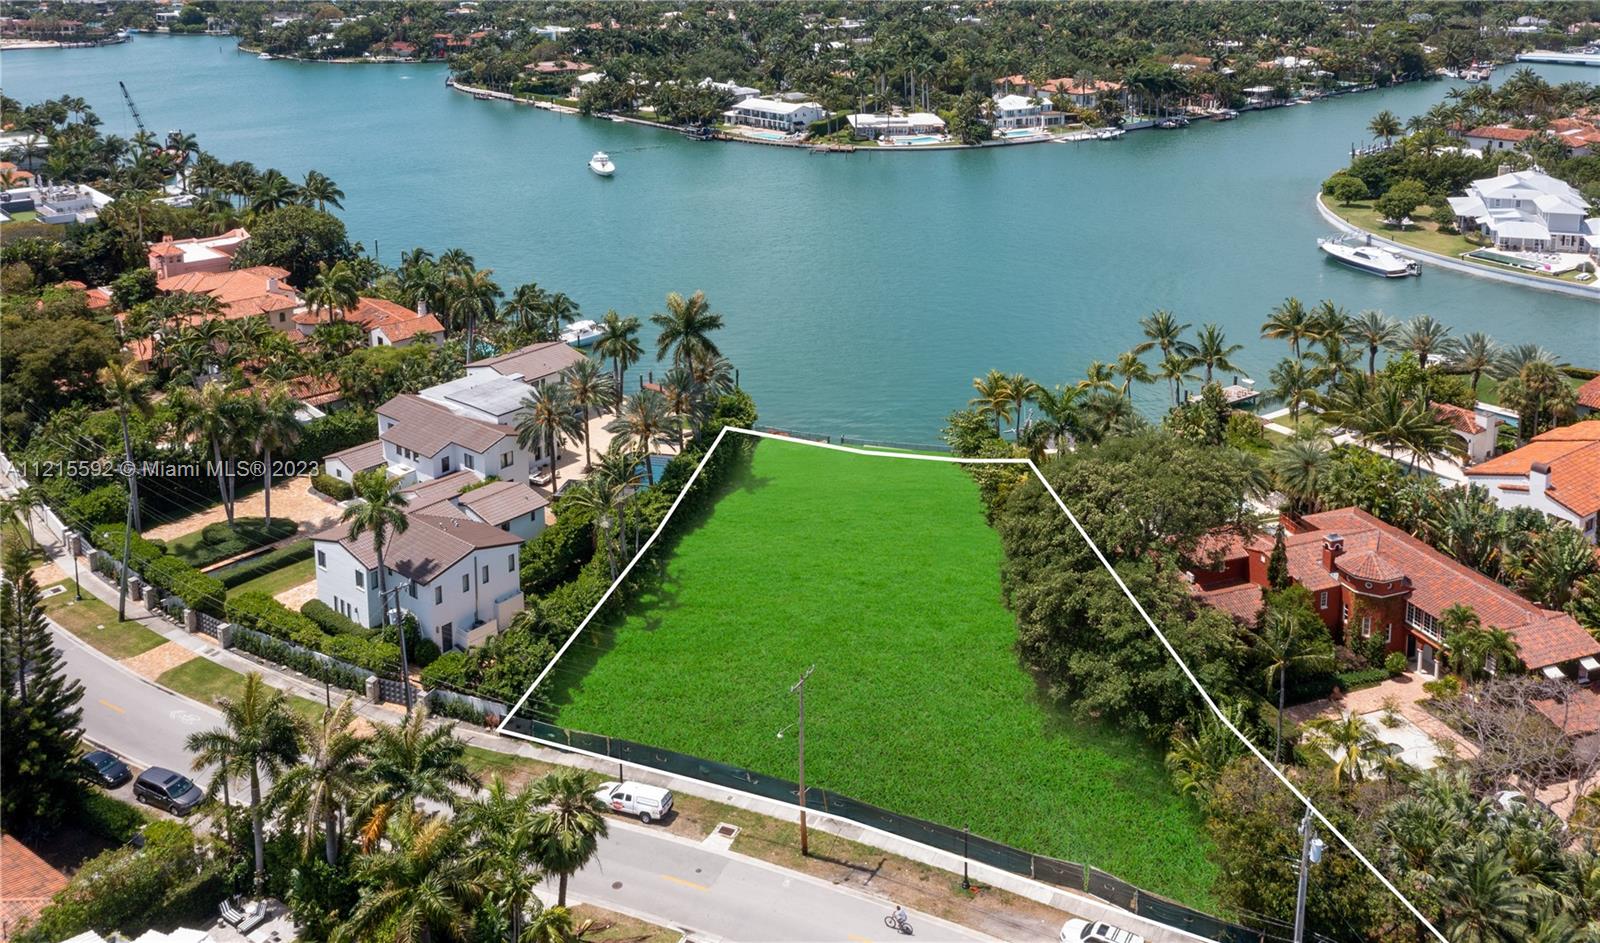 Most exclusive part of N Bay Rd, Sunset Lake, 14,500 sf home, on a 28,245 SF lot., an 8-beds 8.5baths w/ 90 ft of Bayfront. Included in the sale are permits and approved plans from world renowned architect. Prime location on Sunset Lake with gorgeous sunsets, close to Lincoln Rd & Sunset Harbour neighborhood. "Square-footage and number of bedrooms/bathrooms is as per the approved plans for renovation.